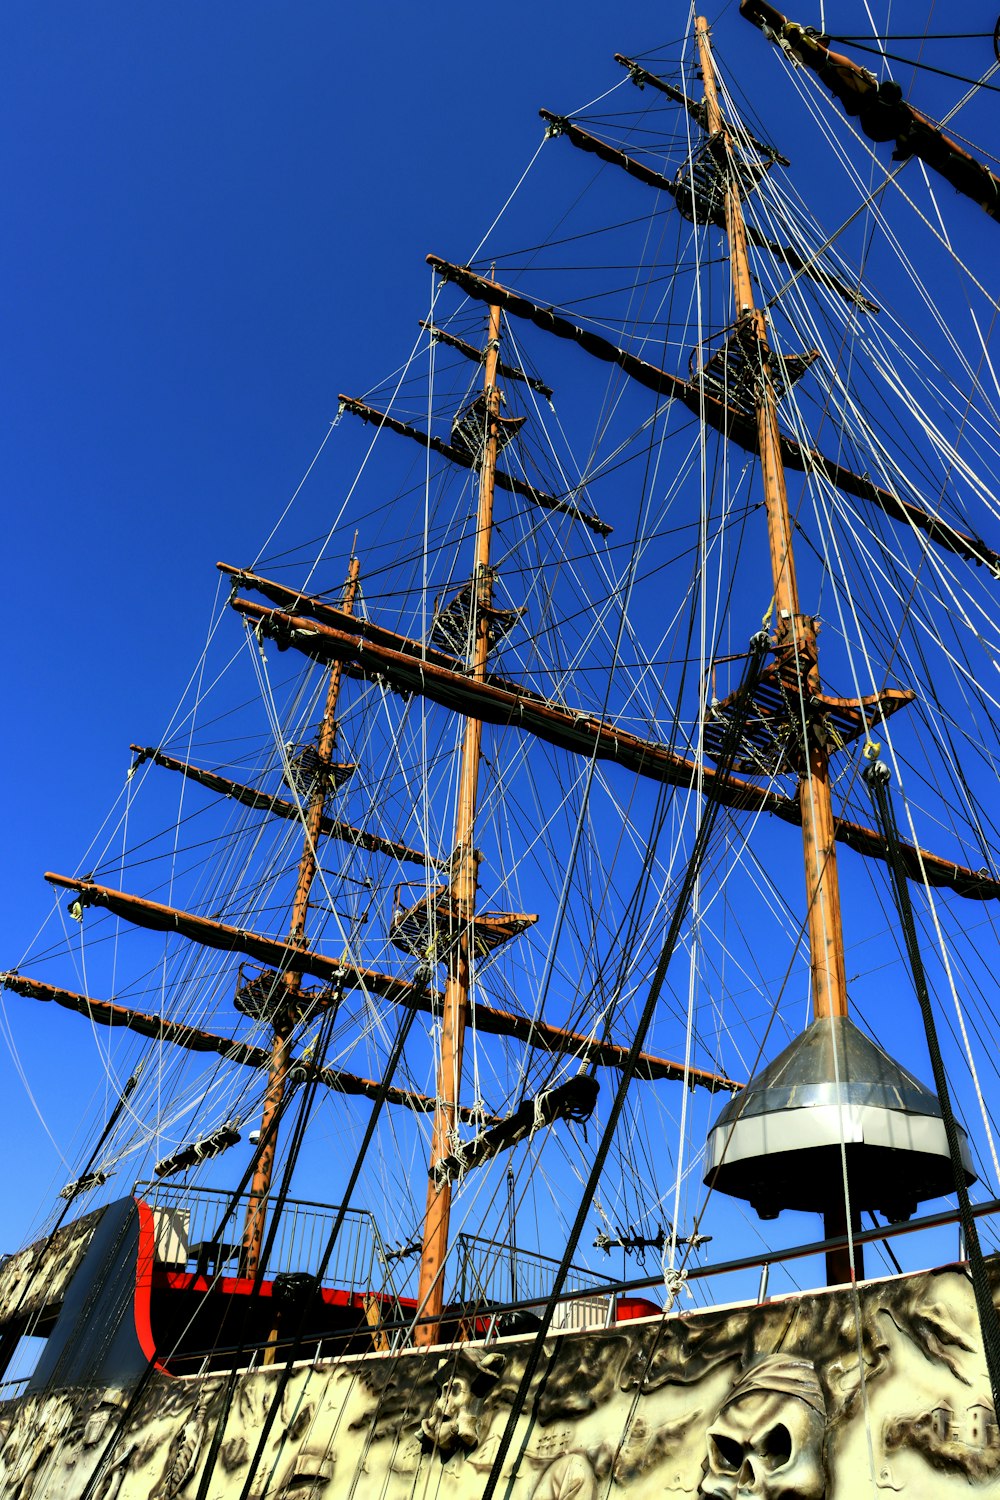 a very tall ship with lots of masts